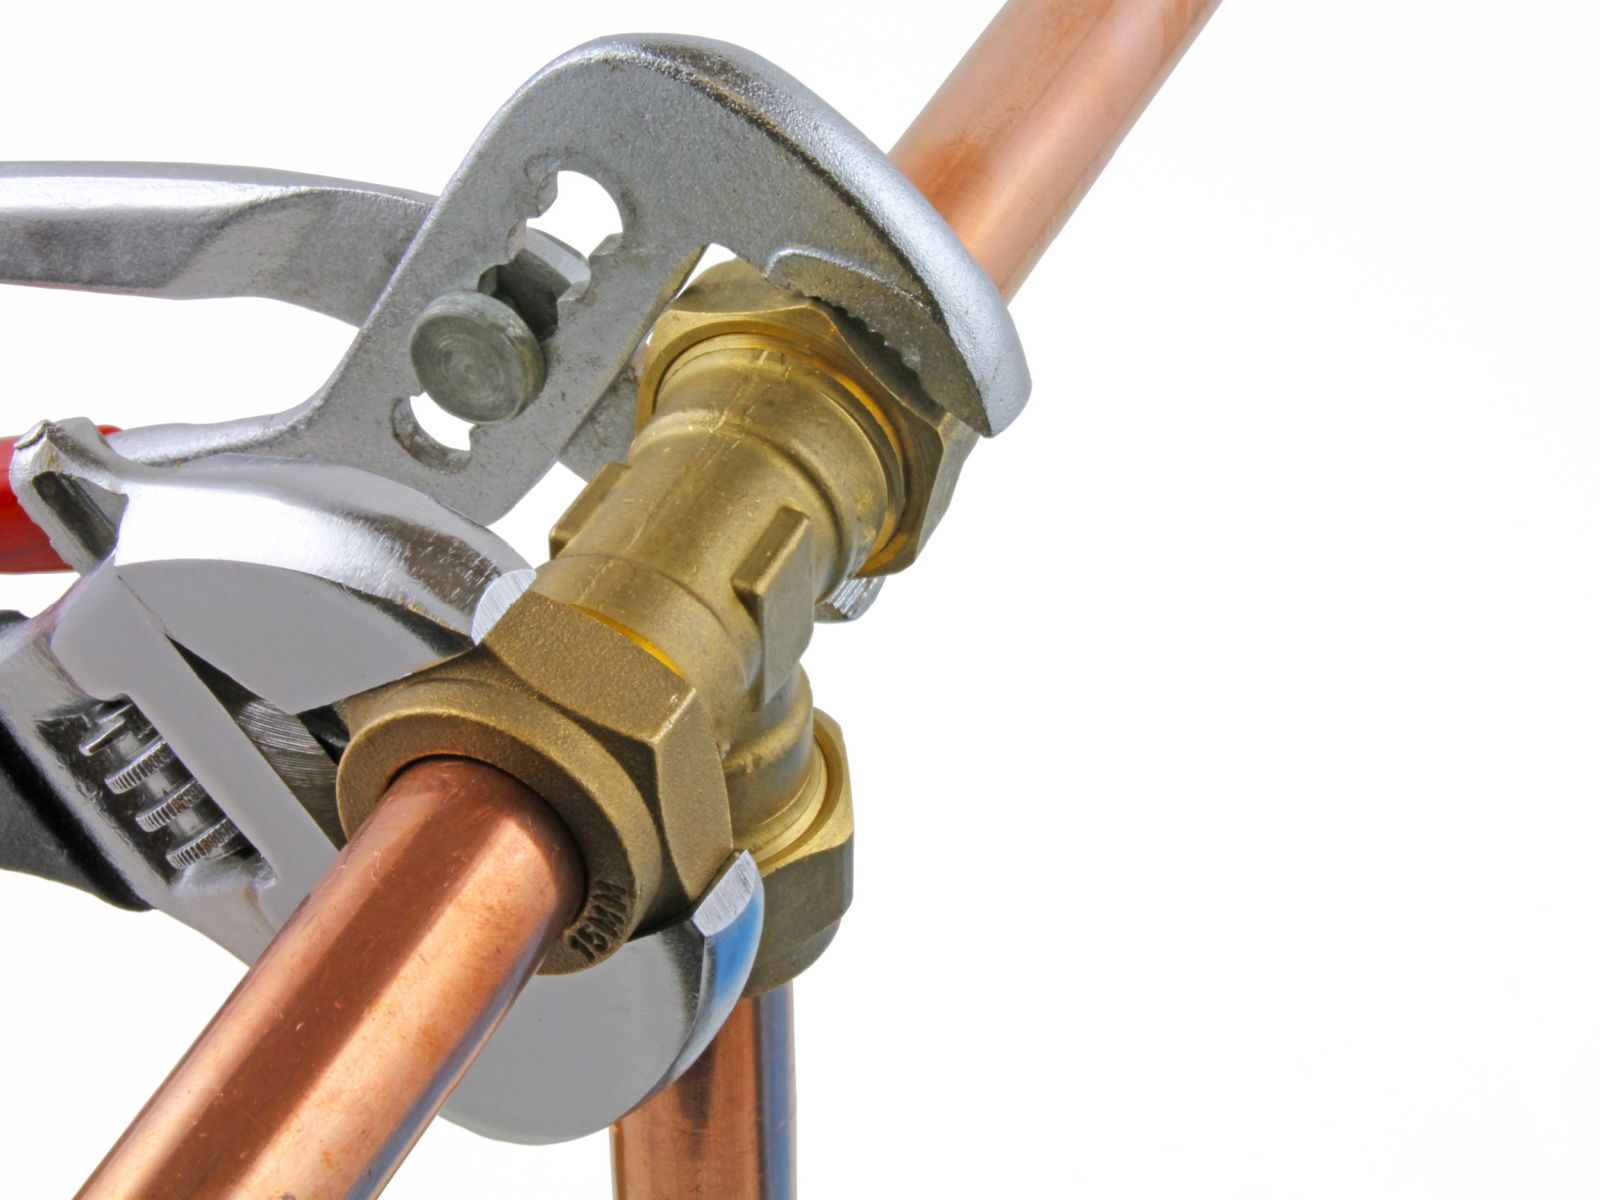 Ensuring Safety with a Trustworthy Gas Fitting Service